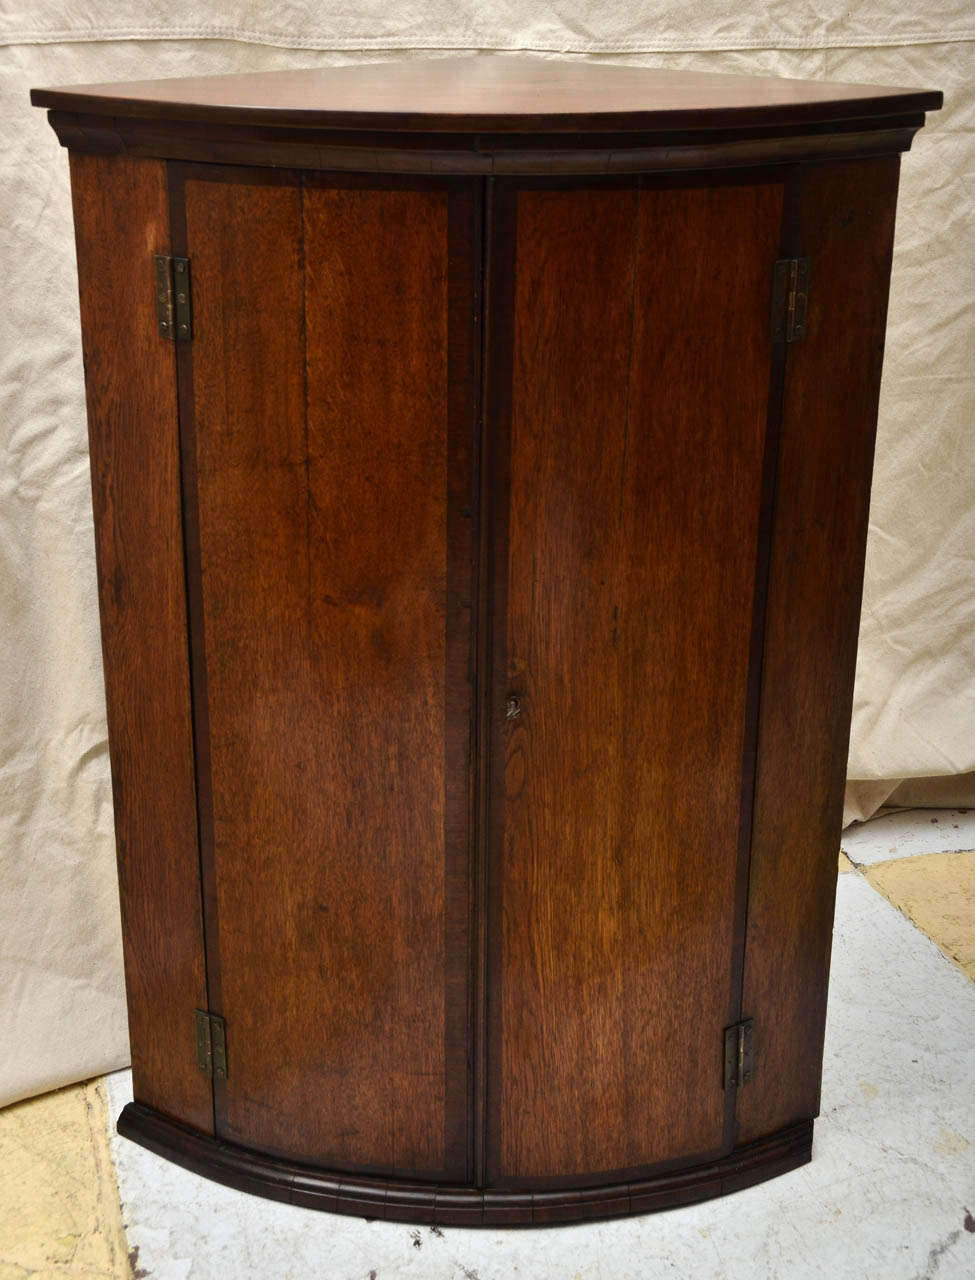 English George III oak mahogany cross banded bow front hanging corner cupboard with later oak top. This type of cupboard would have originally hung from a corner. Now it can be used on the ground or hung in a corner.  Great for storage in a bathroom